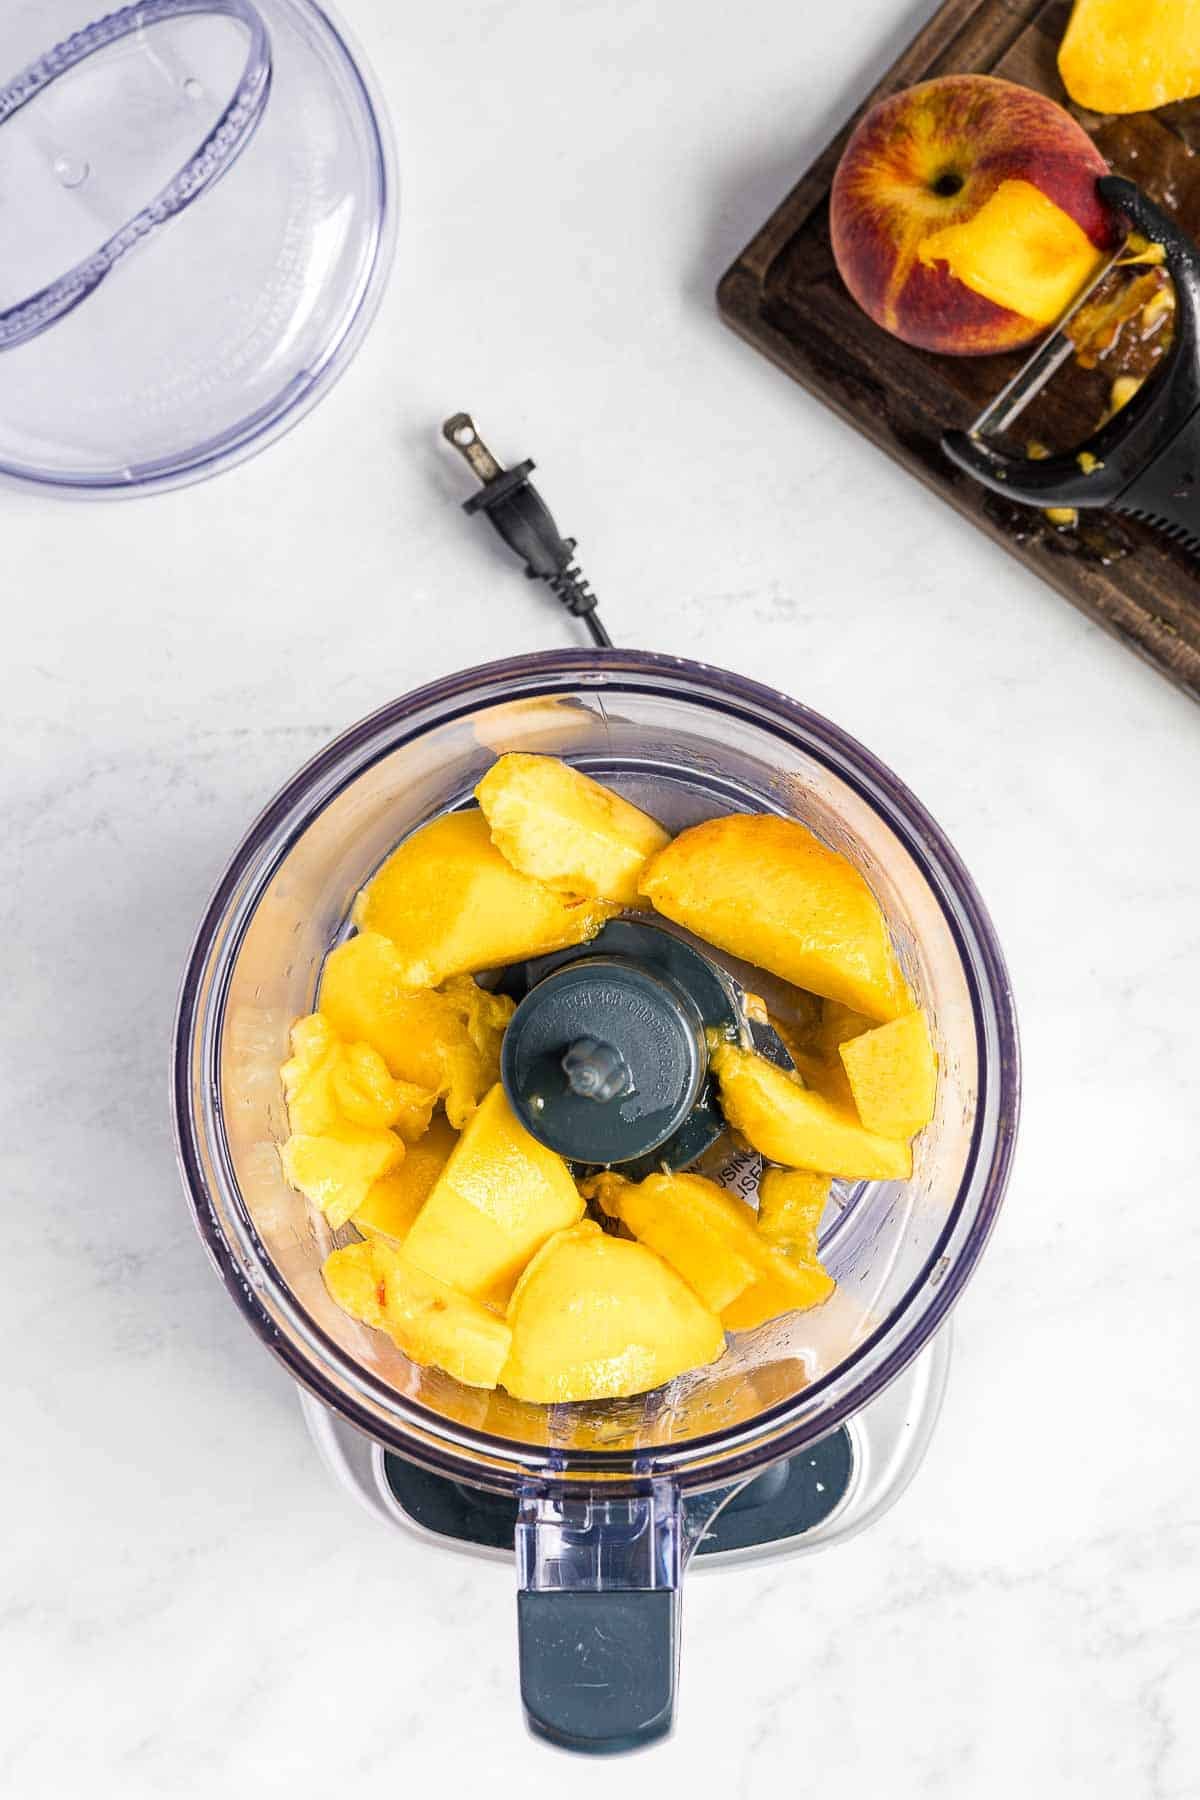 A food processor with chopped peaches inside sits on a countertop. A partially peeled peach and a peeler are on a cutting board beside it.